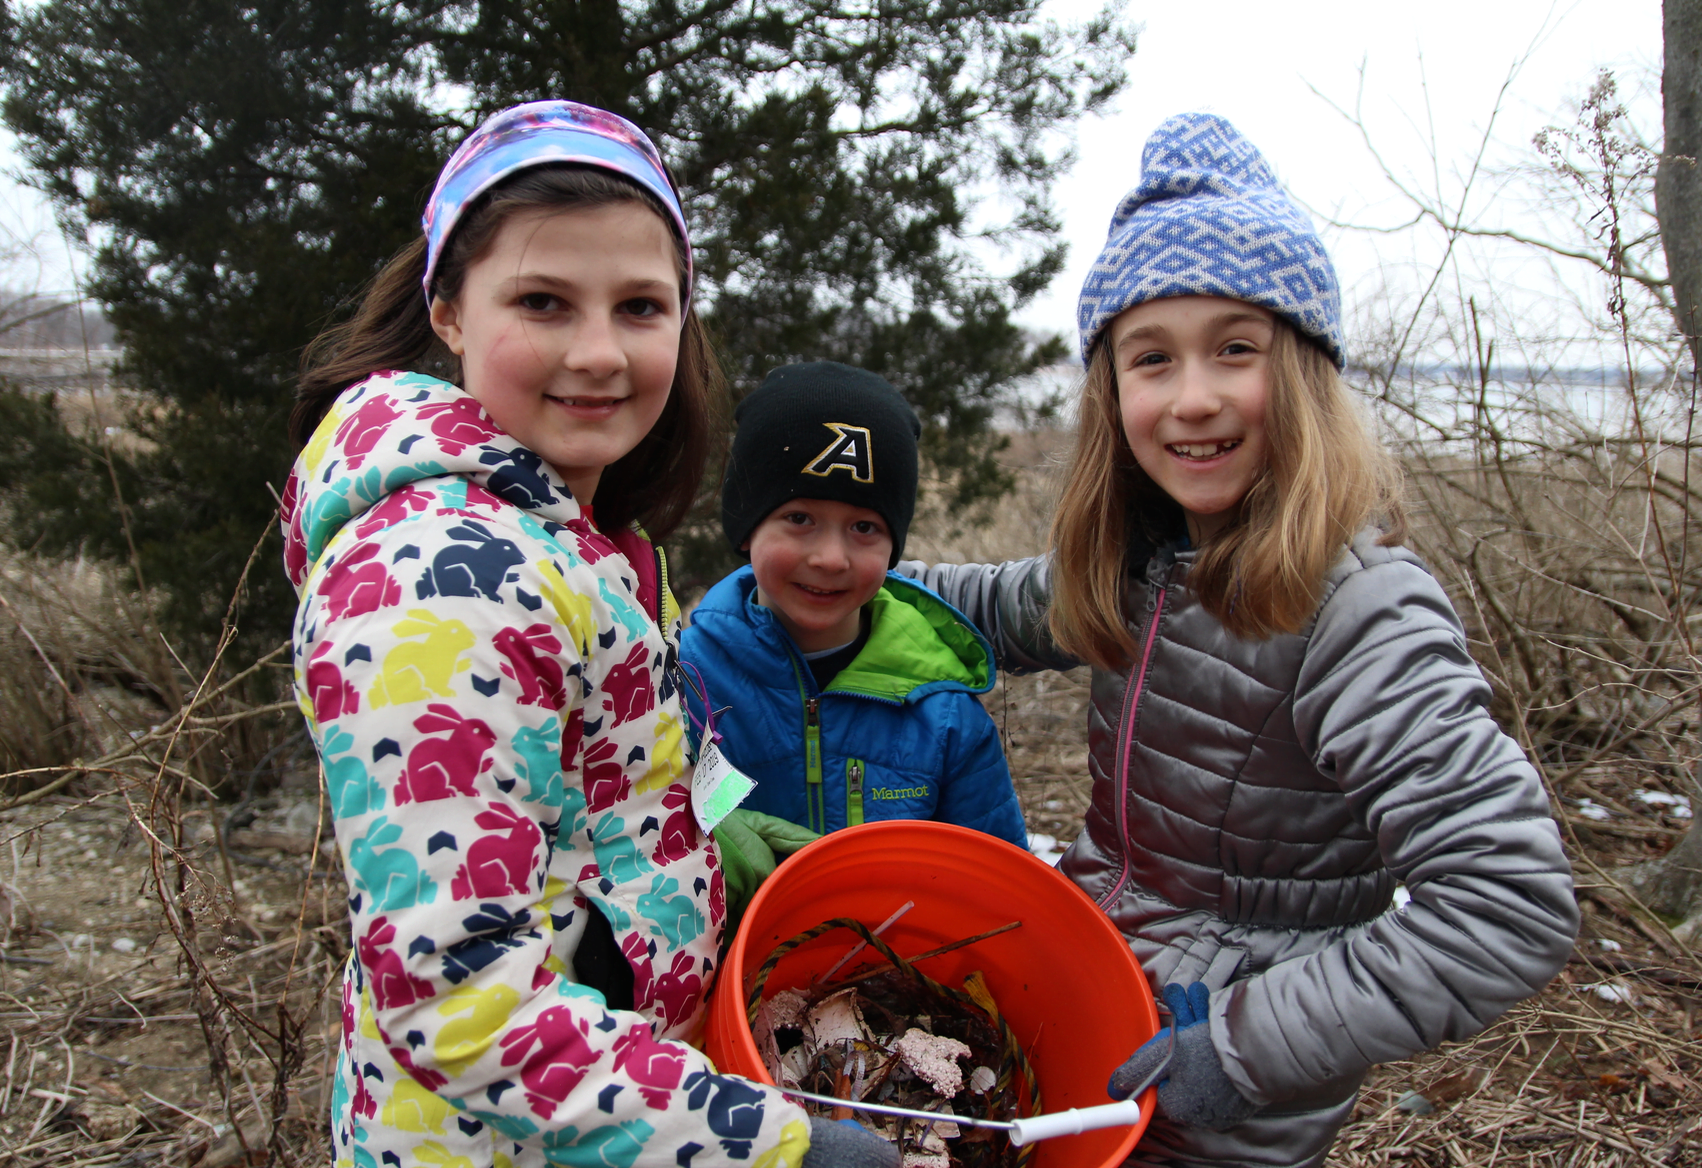 Madeleine Martin and Guiliana Amodeo of Riverside School said they had fun collecting debris at Greenwich Point. March 3, 2019 Photo: Leslie Yager